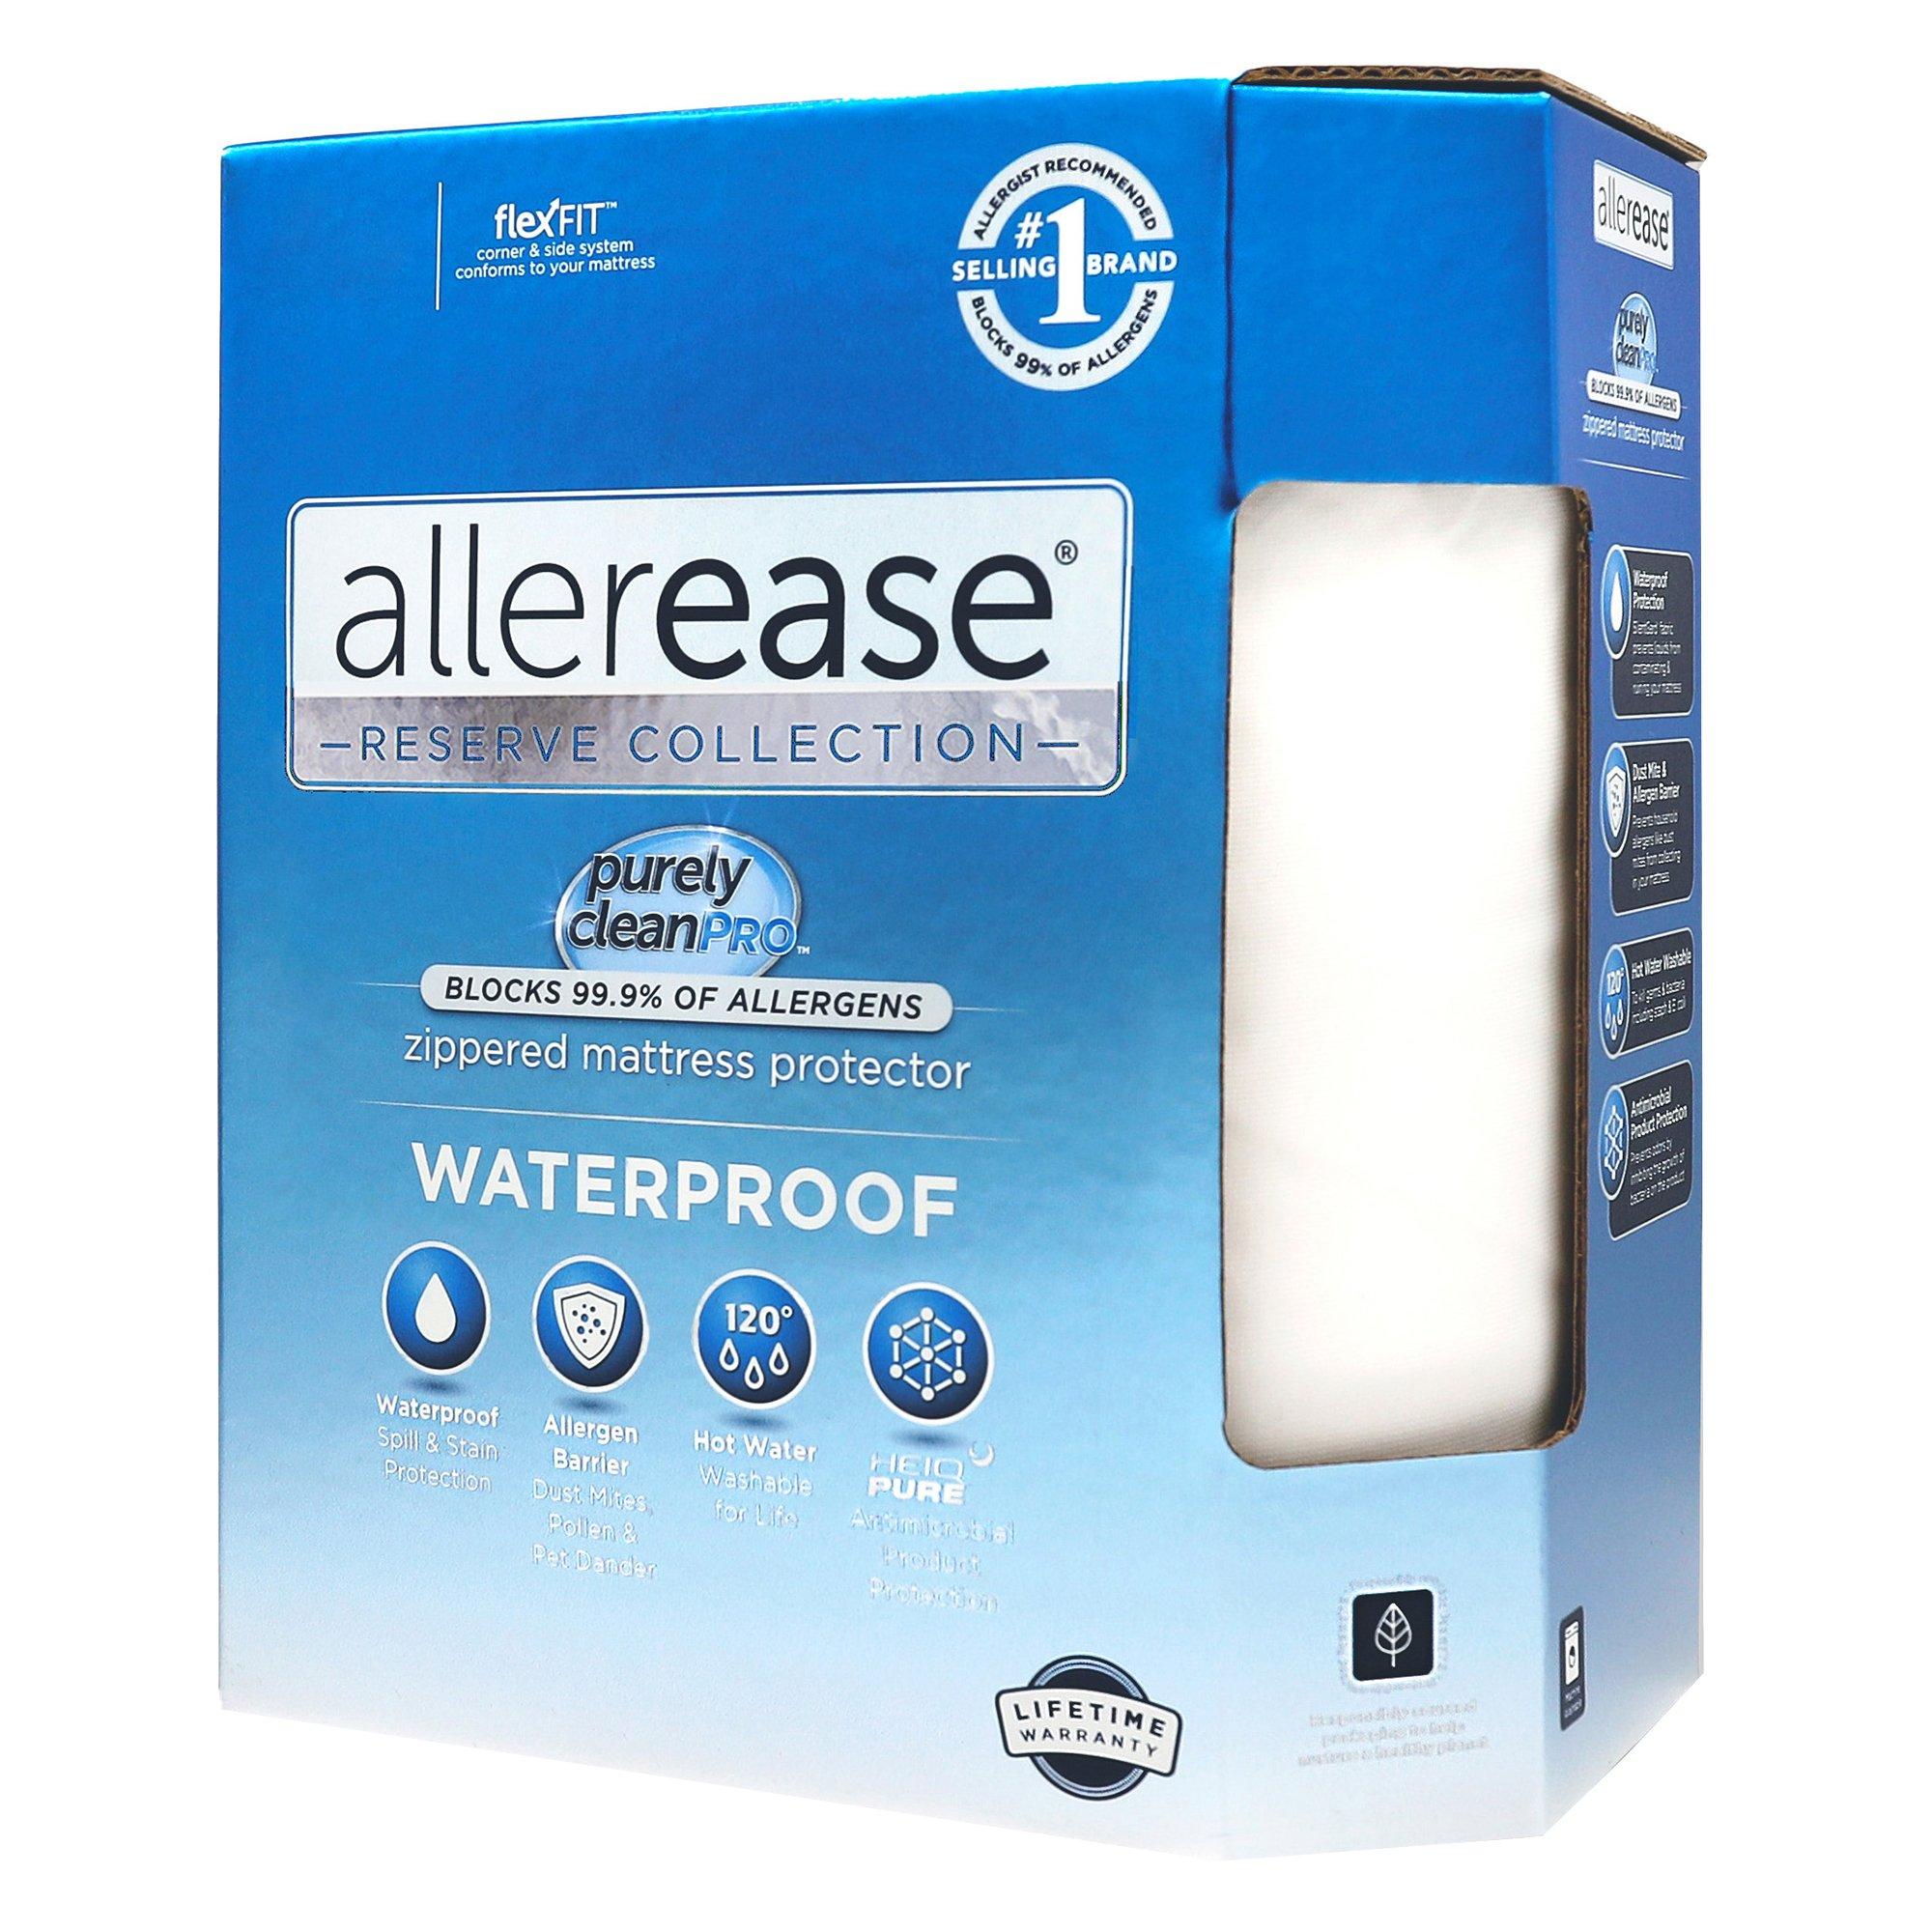 AllerEase Maximum Allergy and Bedbug Mattress Protector, King - Food 4 Less